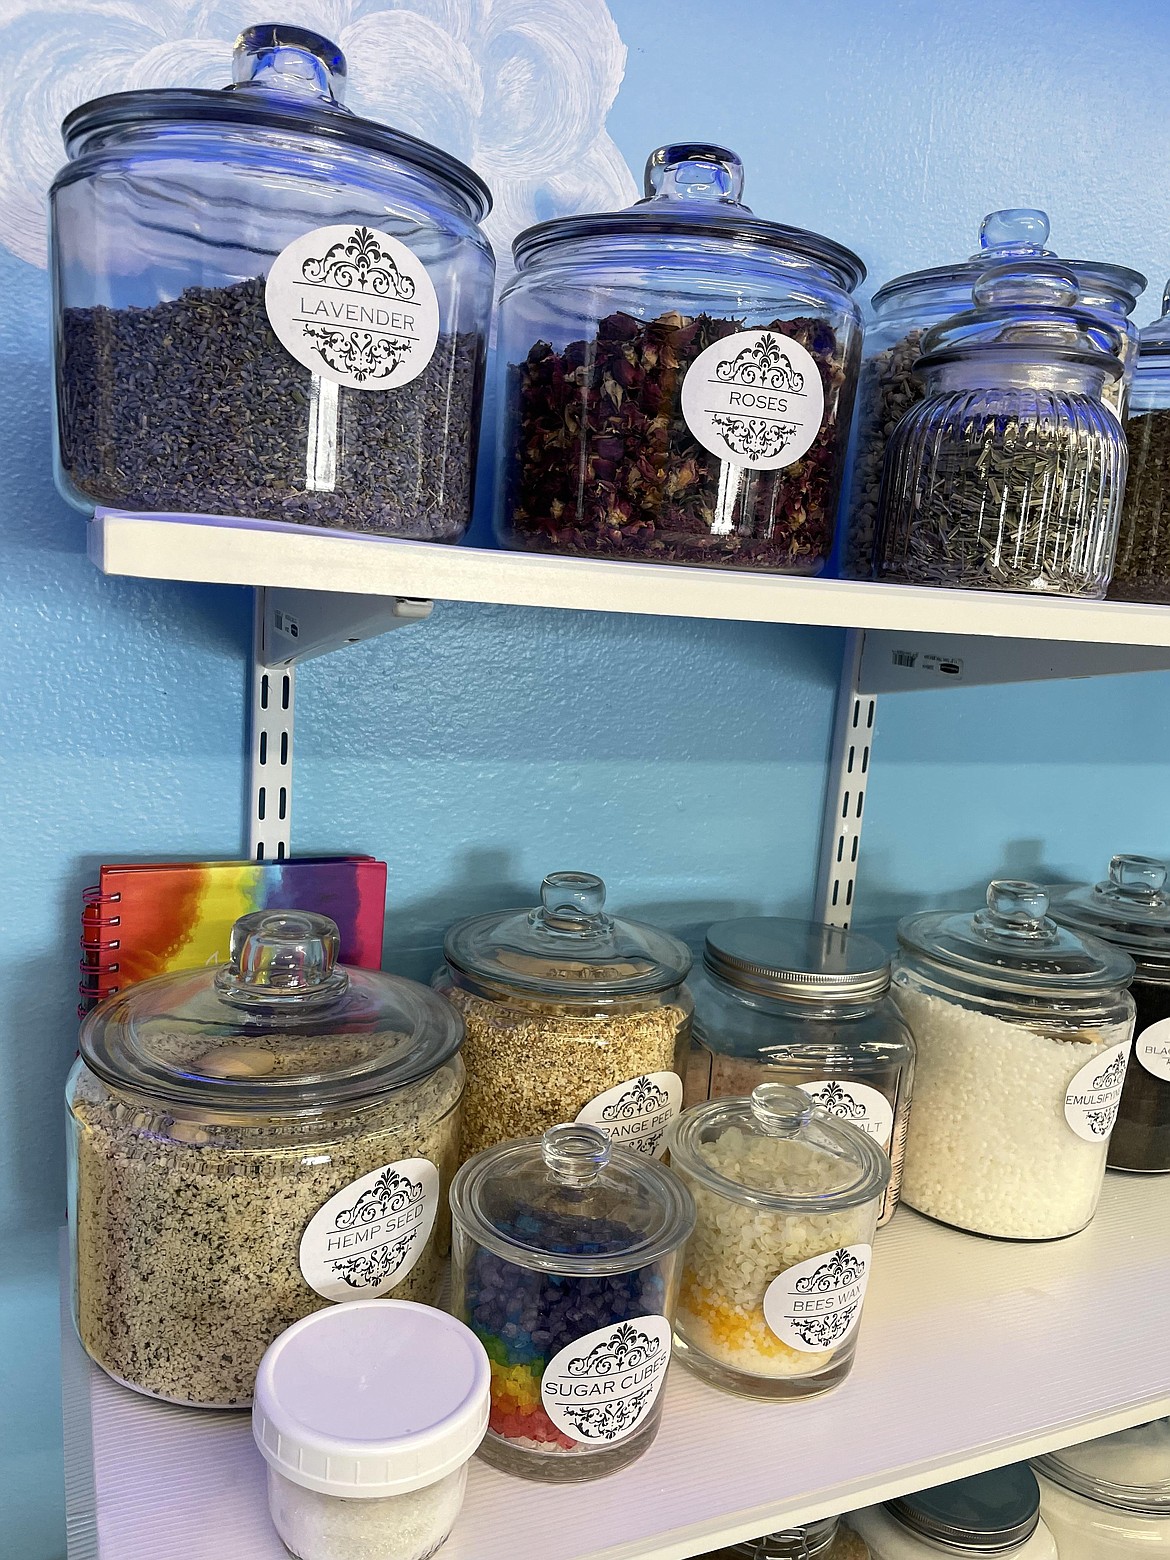 Some of the scents and scrubs available to create custom lotions, bath scrubs and bath bombs at Seeds 'n Stone Natural Therapeutic Products.